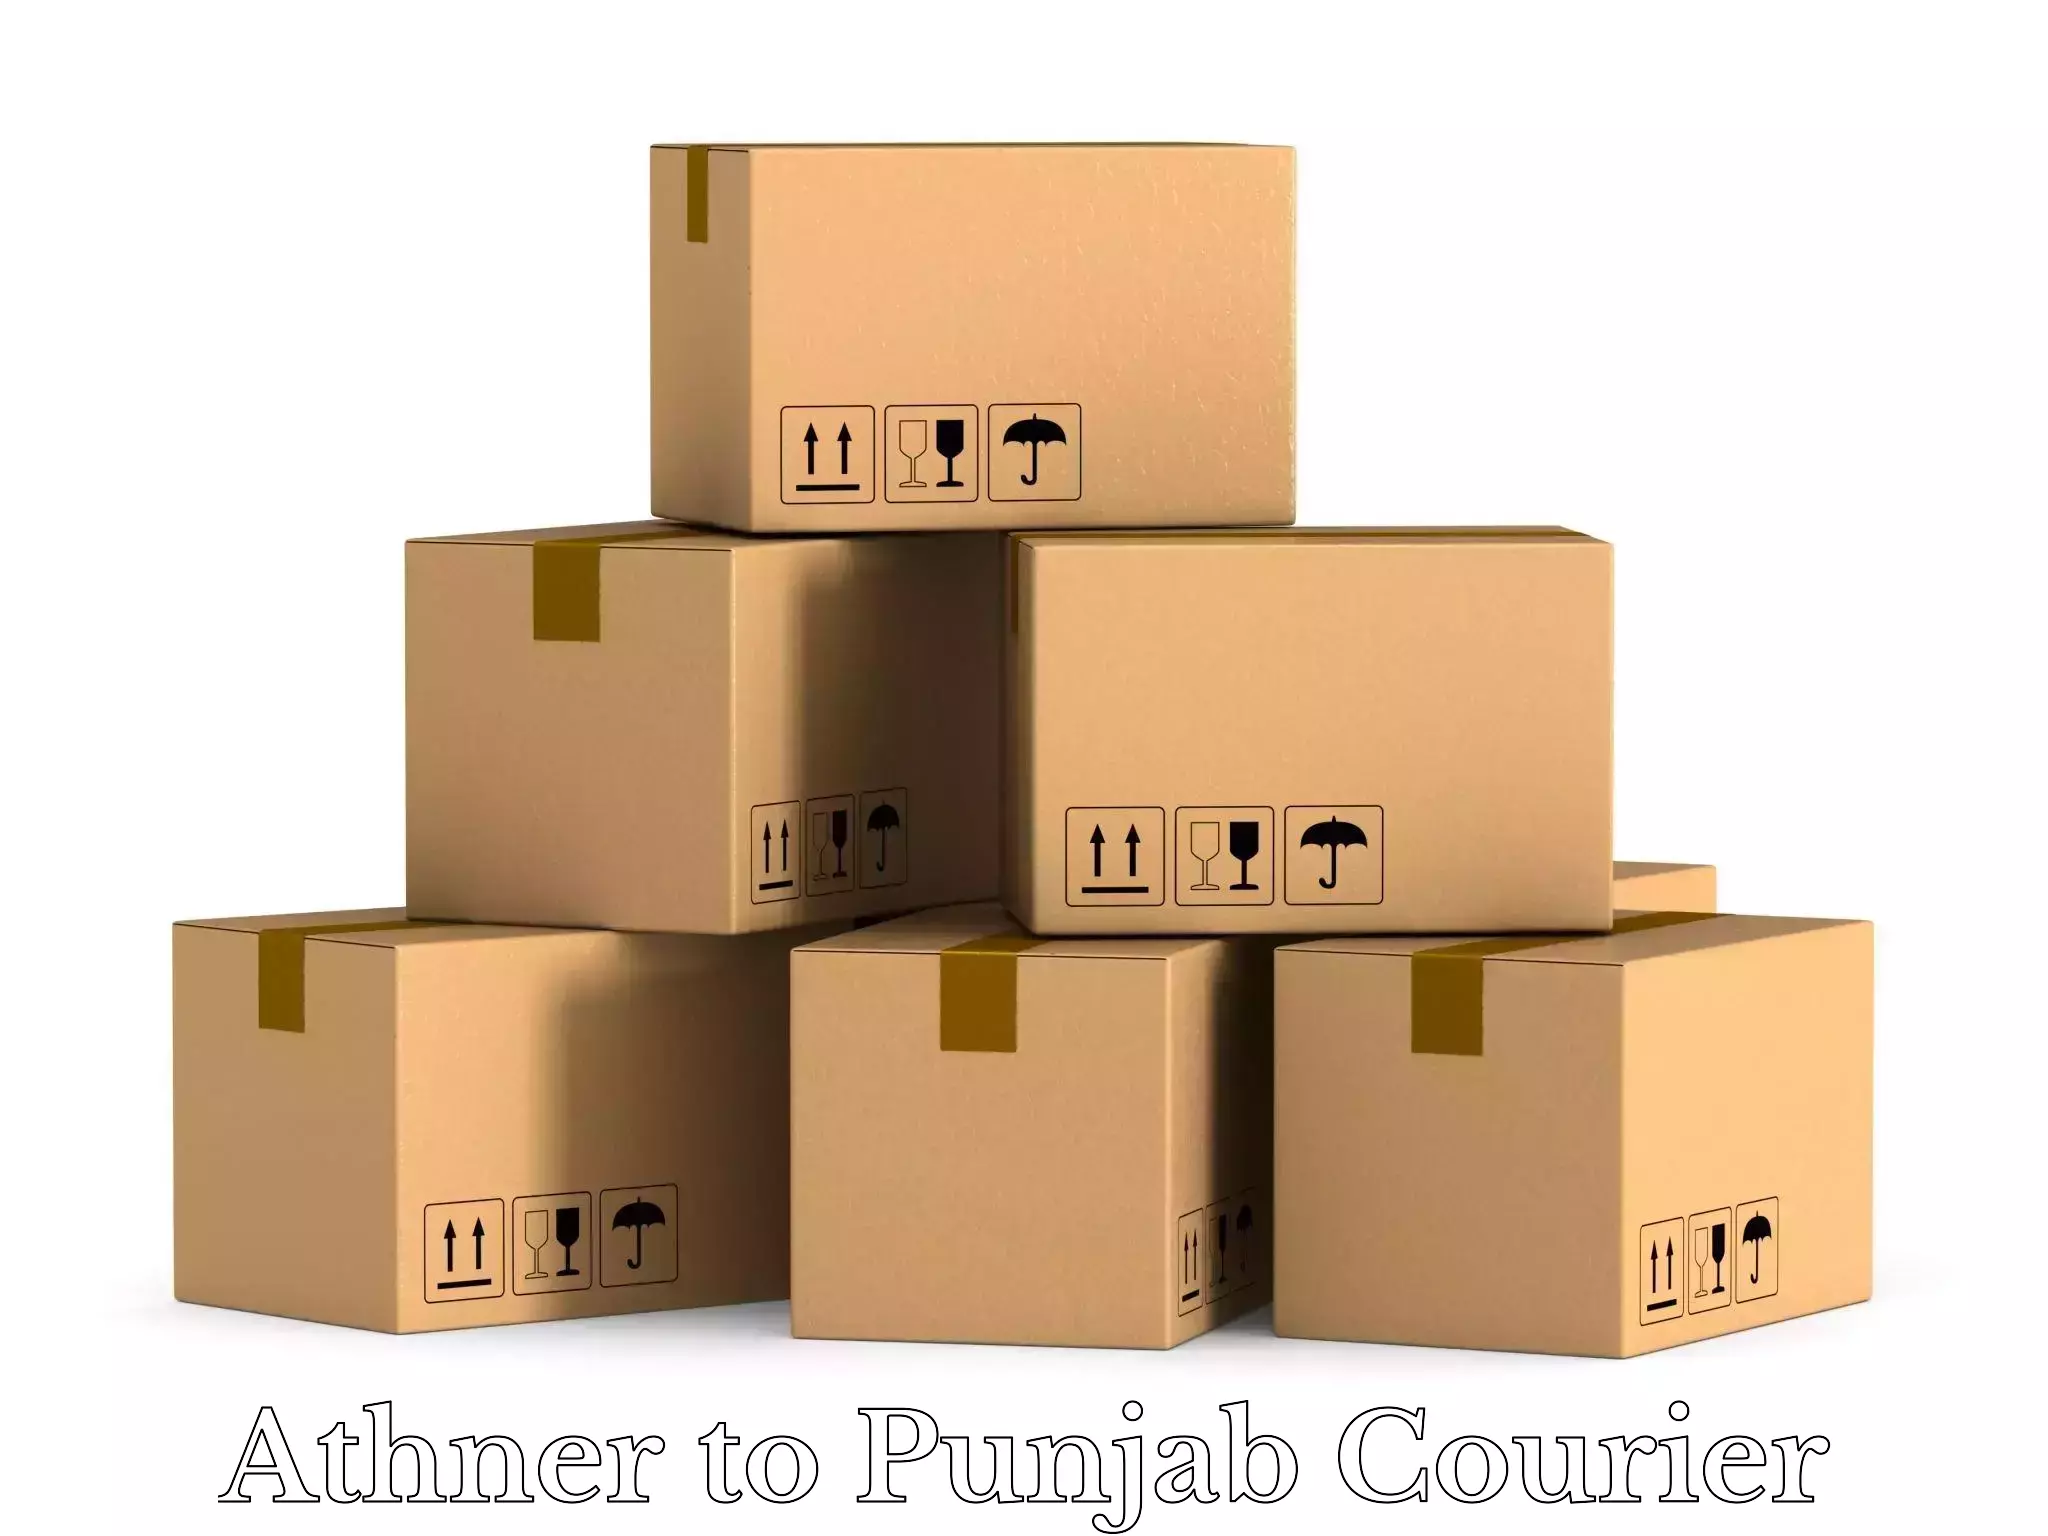 Luggage shipment specialists Athner to Muktsar